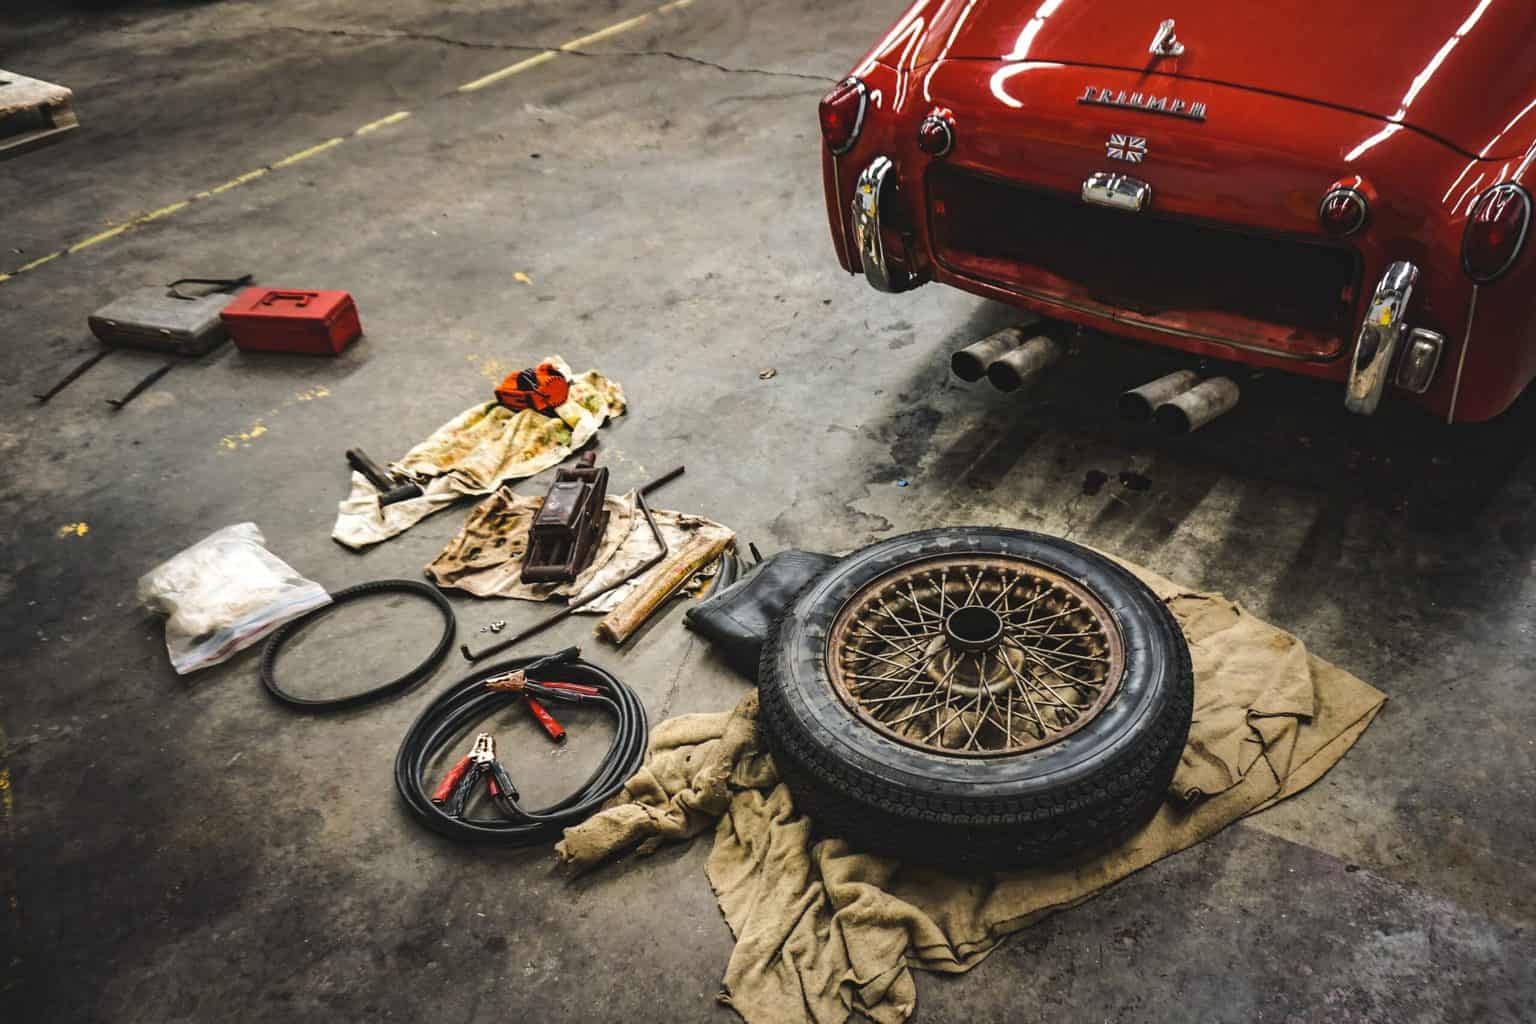 Different kinds of tools and a wheel behind the red car